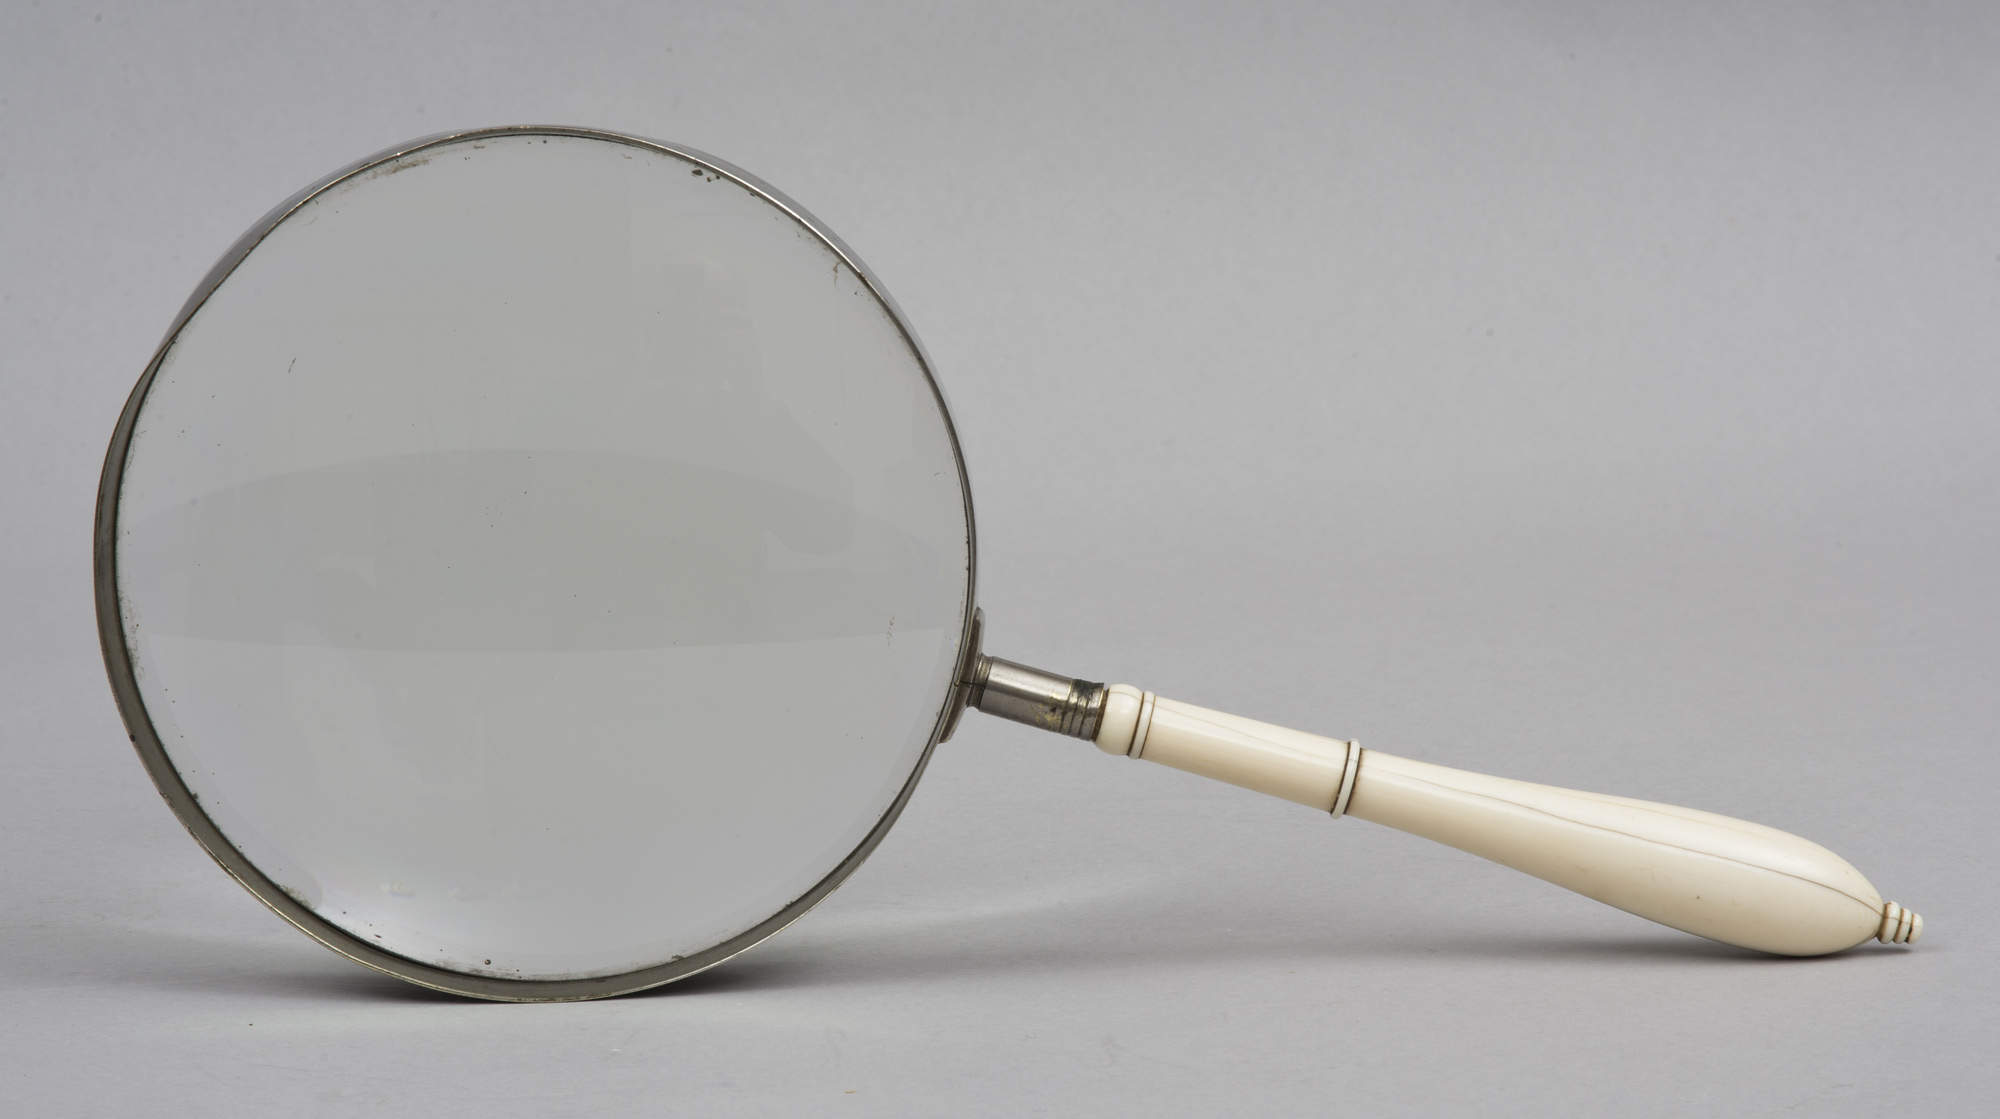 Product » Very Large Magnifying Glass